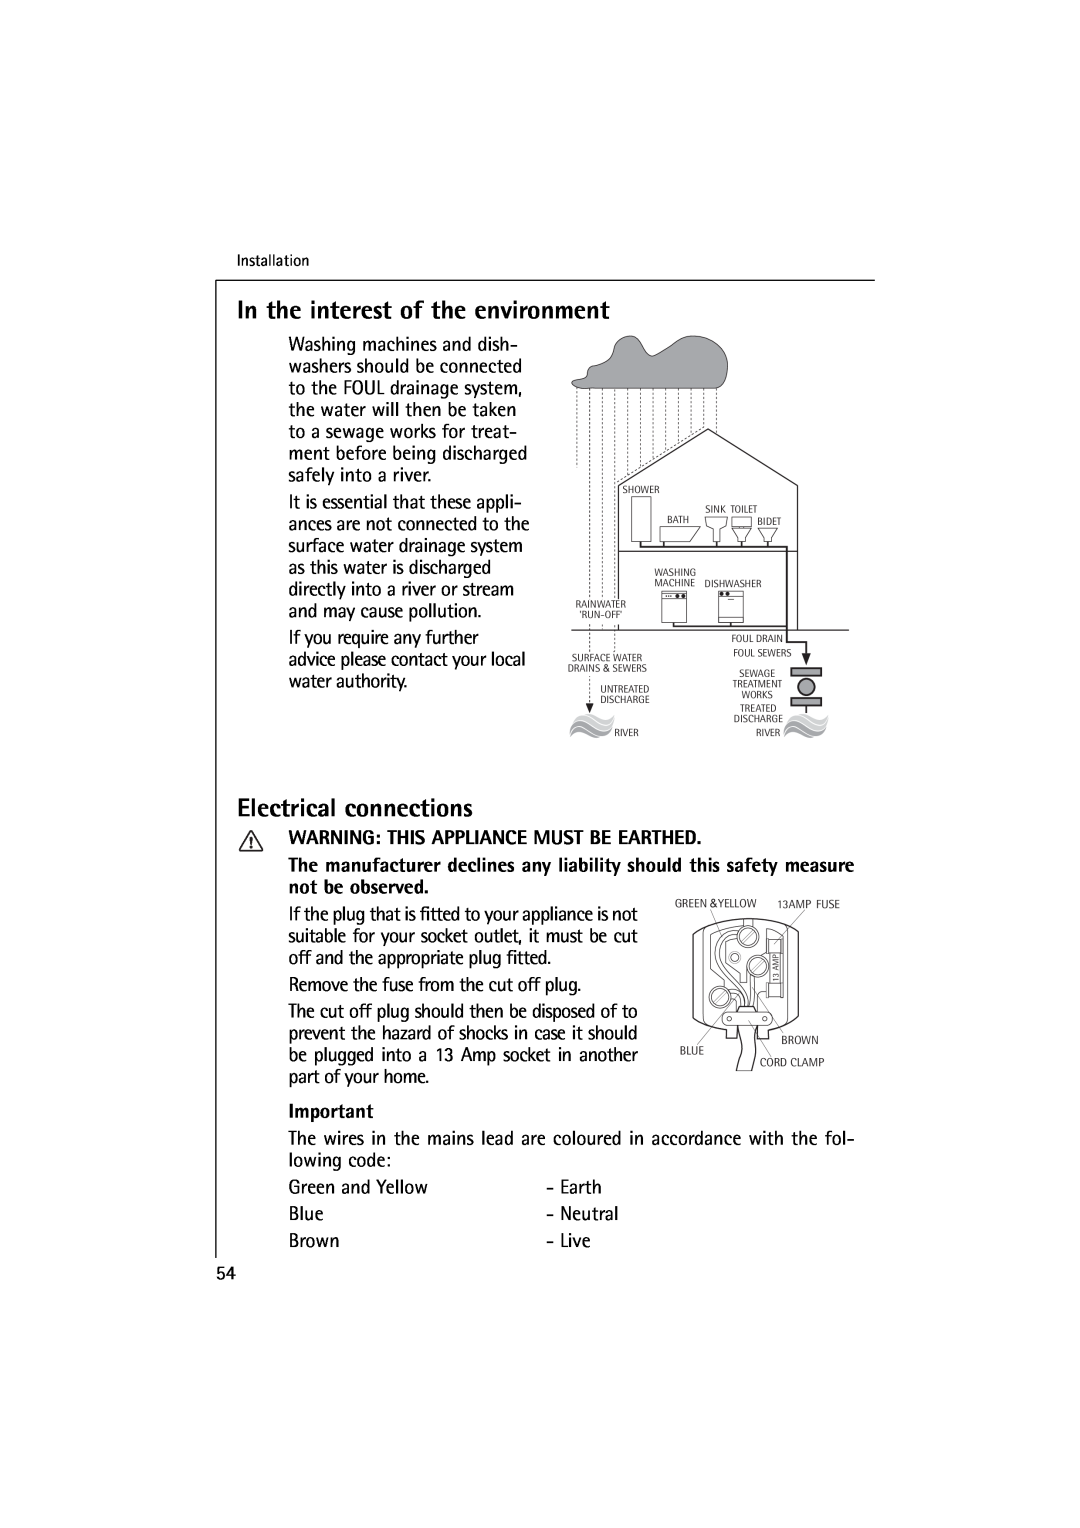 Electrolux 16830 manual In the interest of the environment, Electrical connections, Warning This Appliance Must Be Earthed 